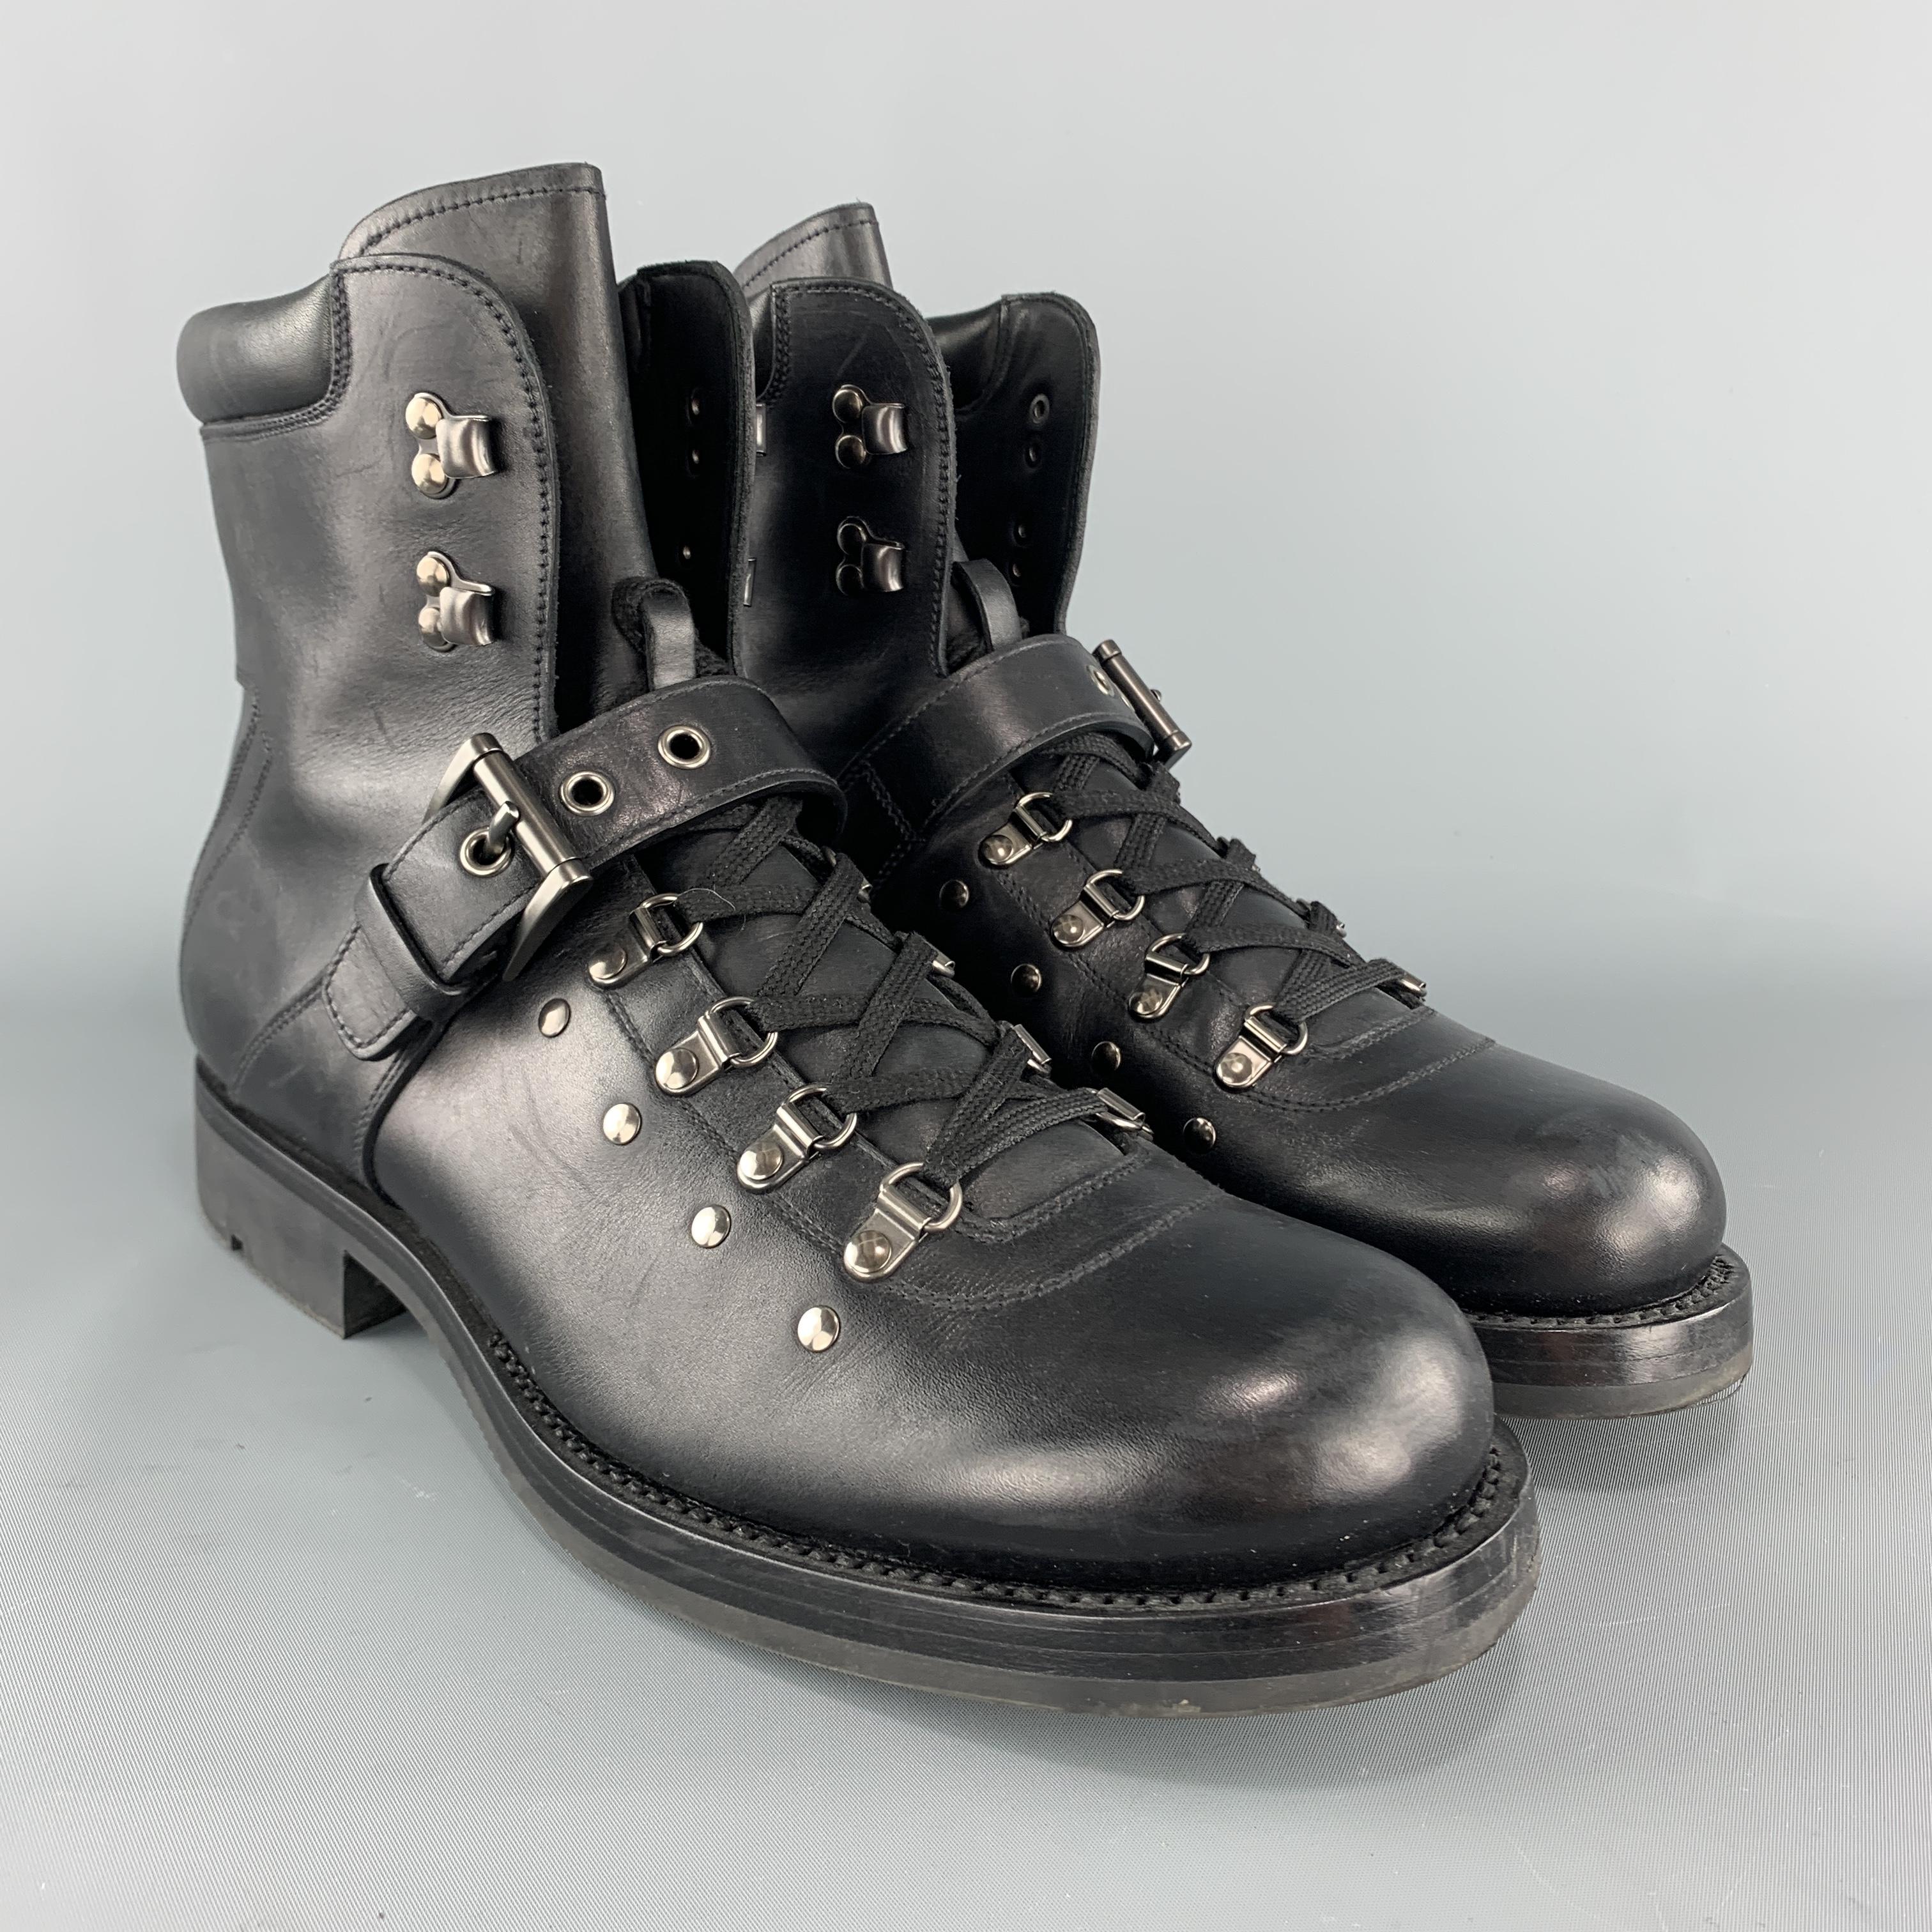 PRADA hiking boots come in black leather with ski hook grommet lace up front, buckled strap, and rubber sole. Made in Italy.

Excellent Pre-Owned Condition.
Marked: UK 9

Outsole: 12.5 x 4.5 in.
Length: 6 in.
Heel: 1.5 in.